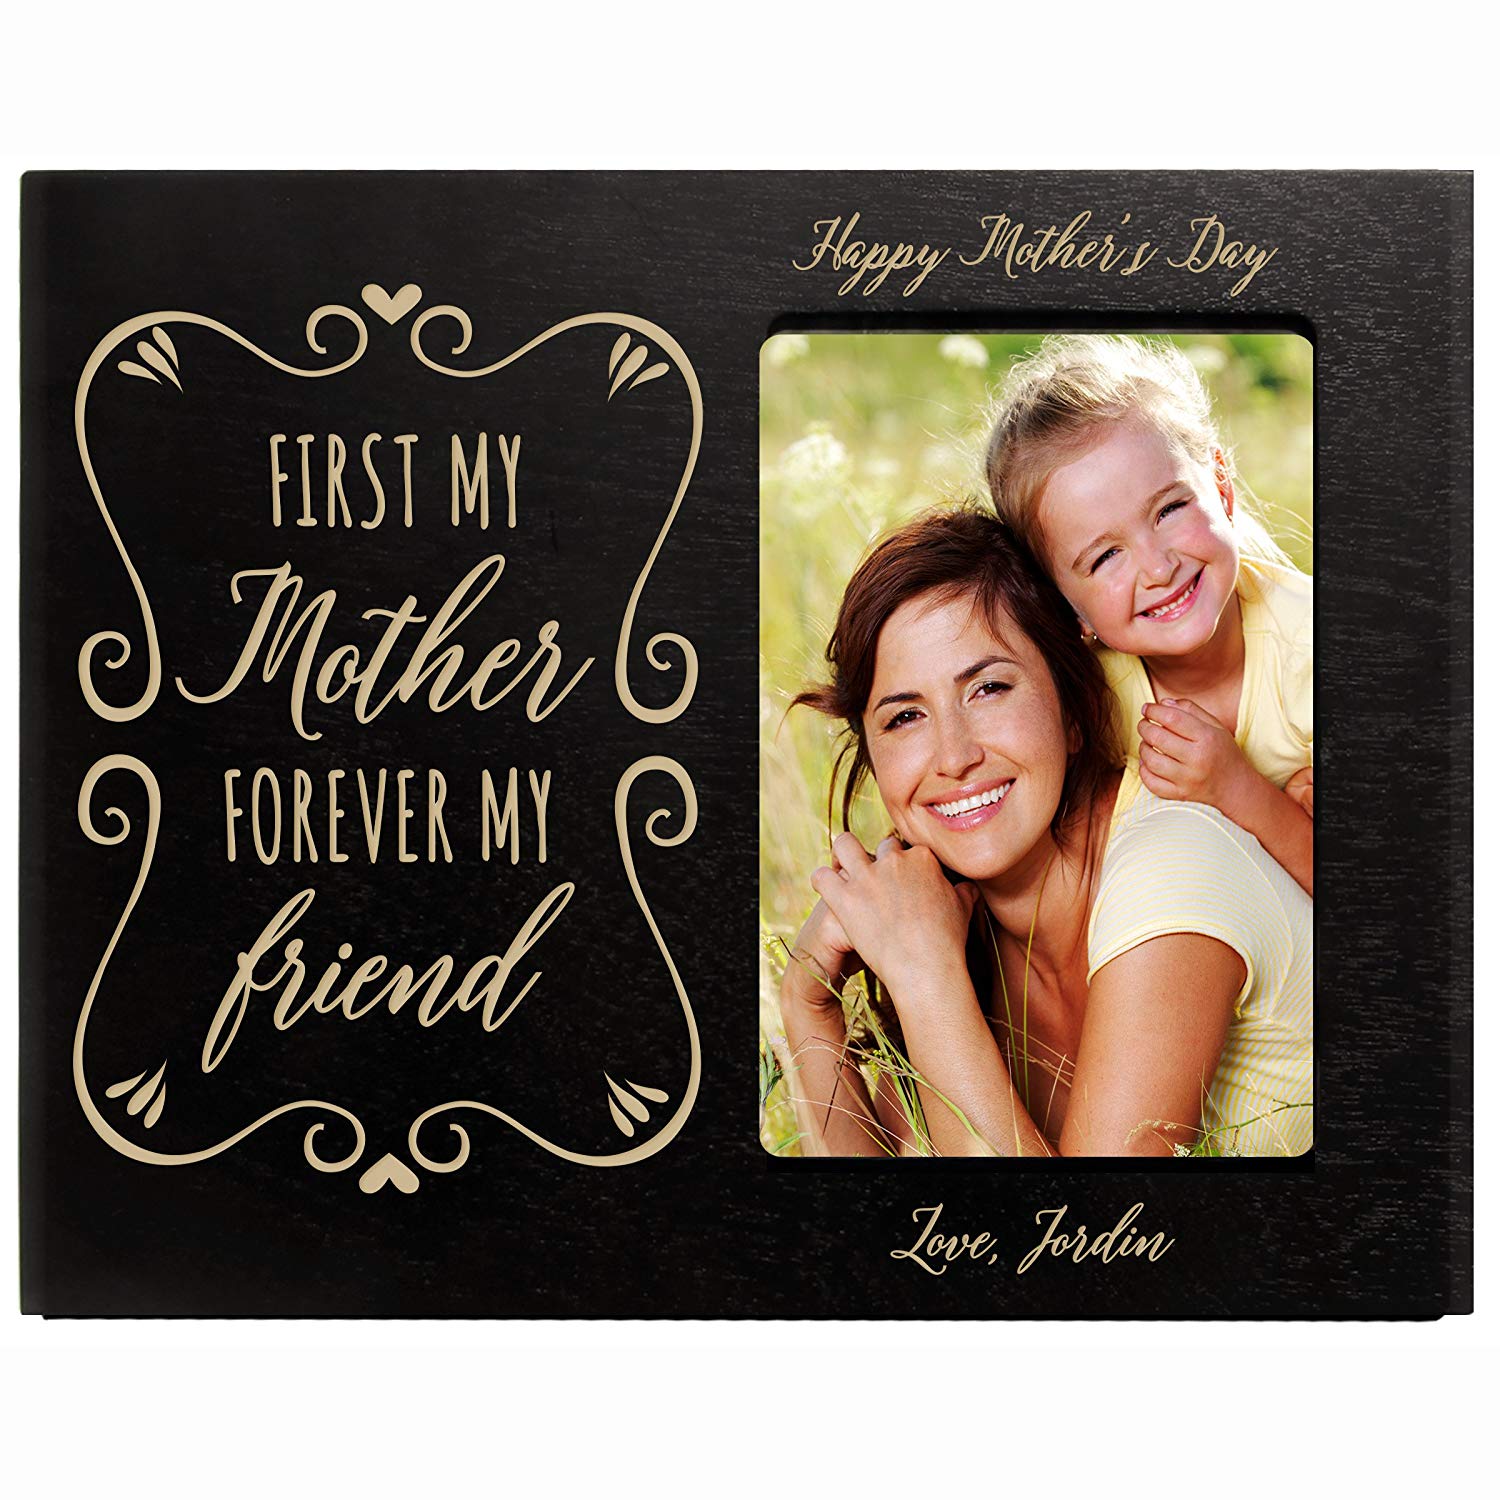 Personalized Happy Mother's Day Photo Frame - First My Mother - LifeSong Milestones